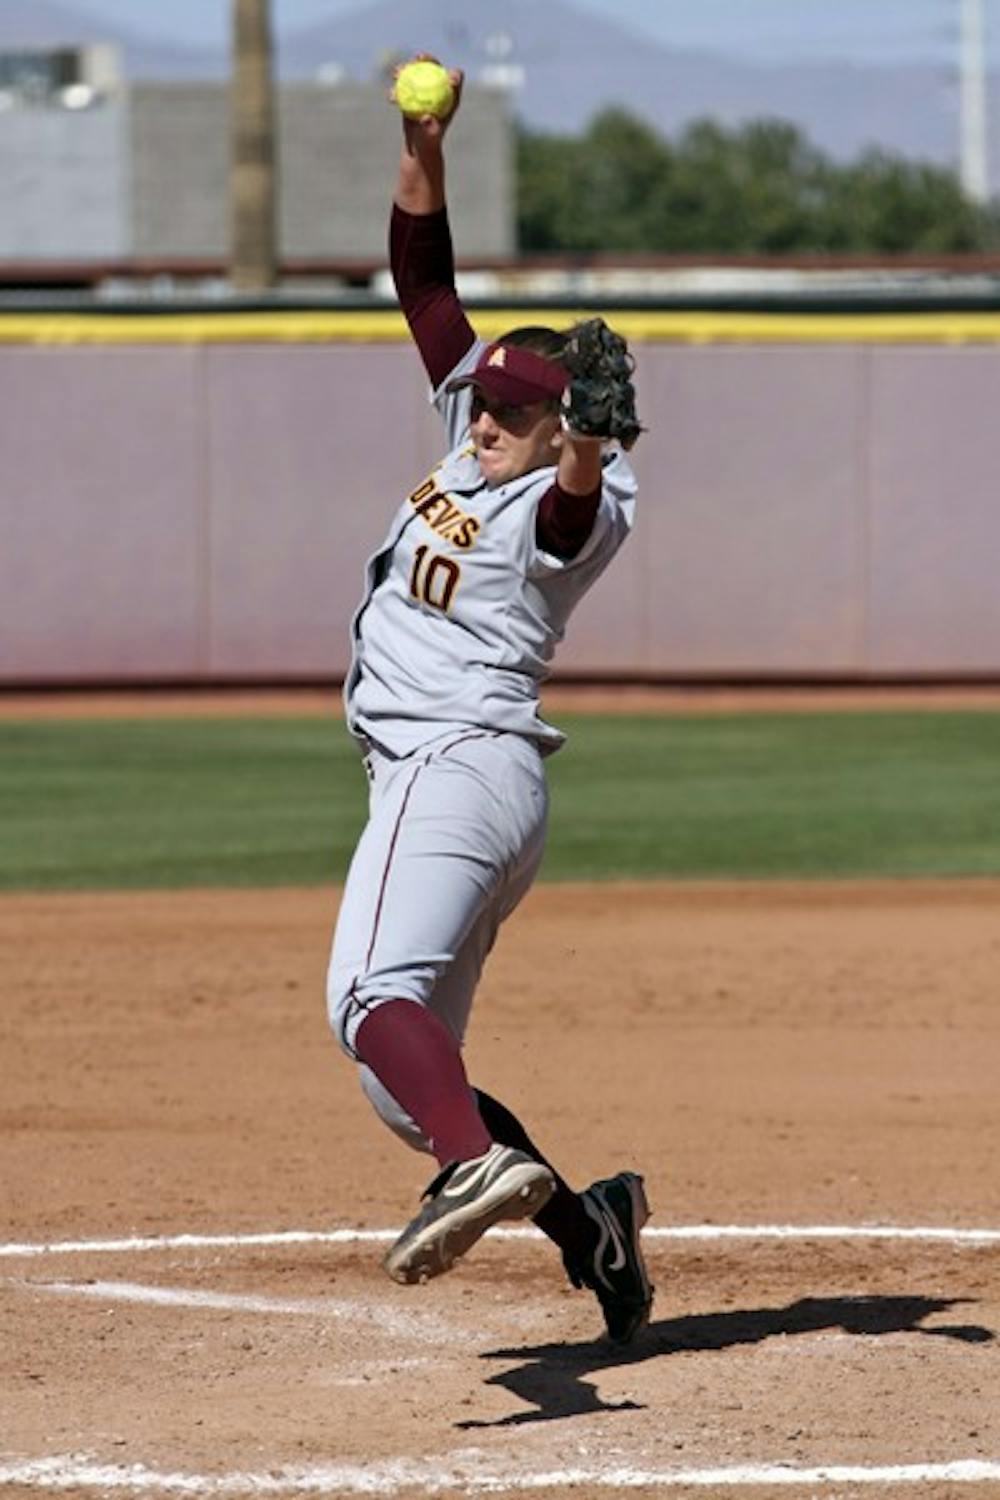 Hillary Bach throws a pitch in a game against UA on March 11. Bach and the Sun Devils are one of the deepest teams in the Pac-12. (Photo by Sam Rosenbaum)